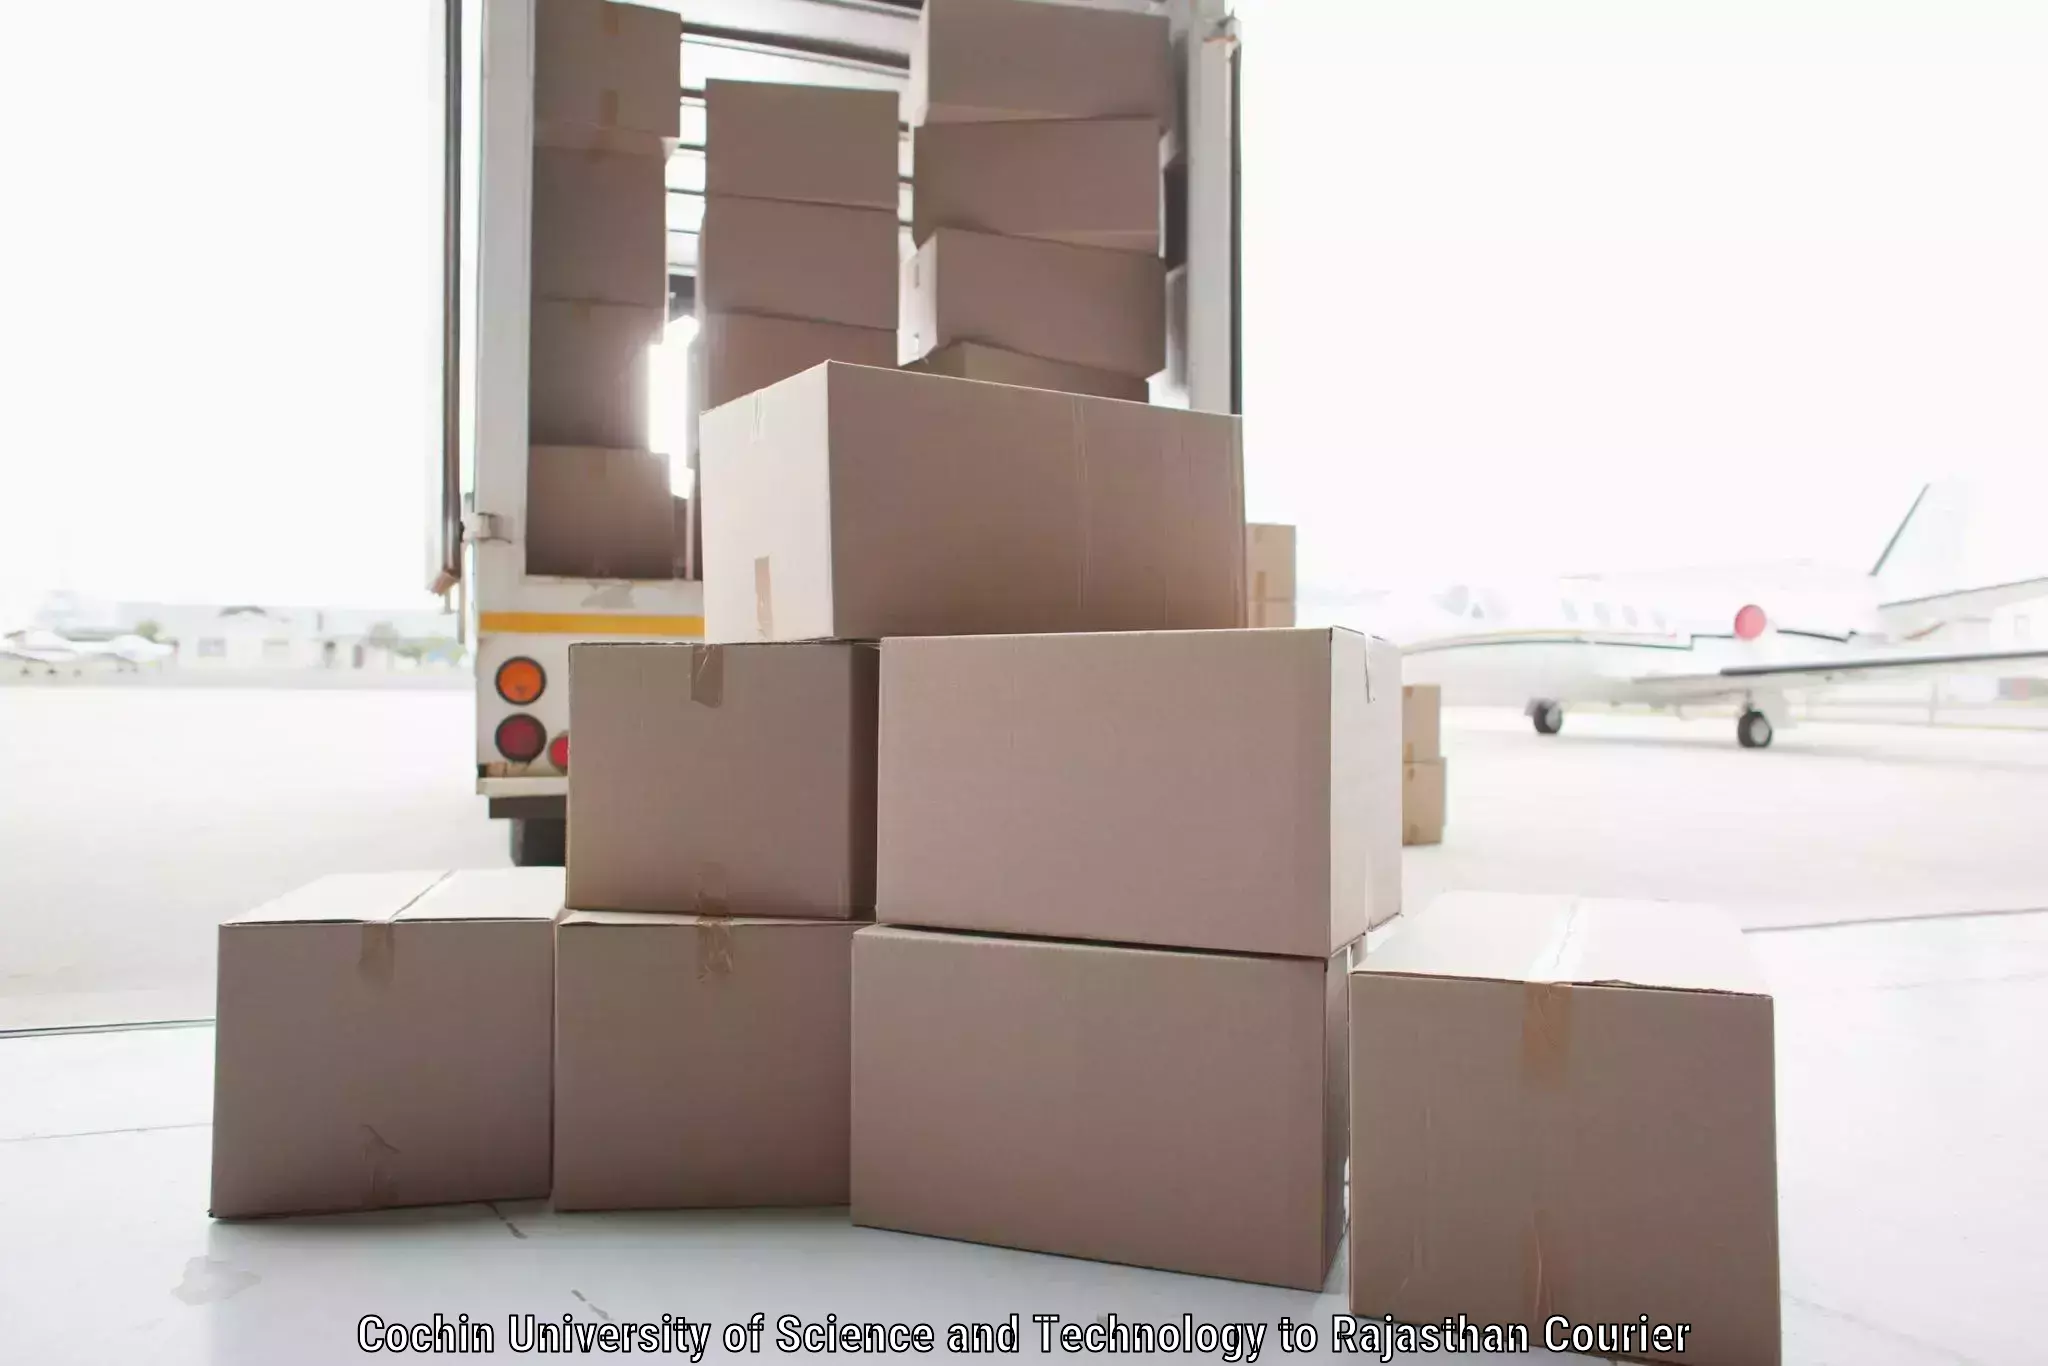 Customized shipping options Cochin University of Science and Technology to Dholpur